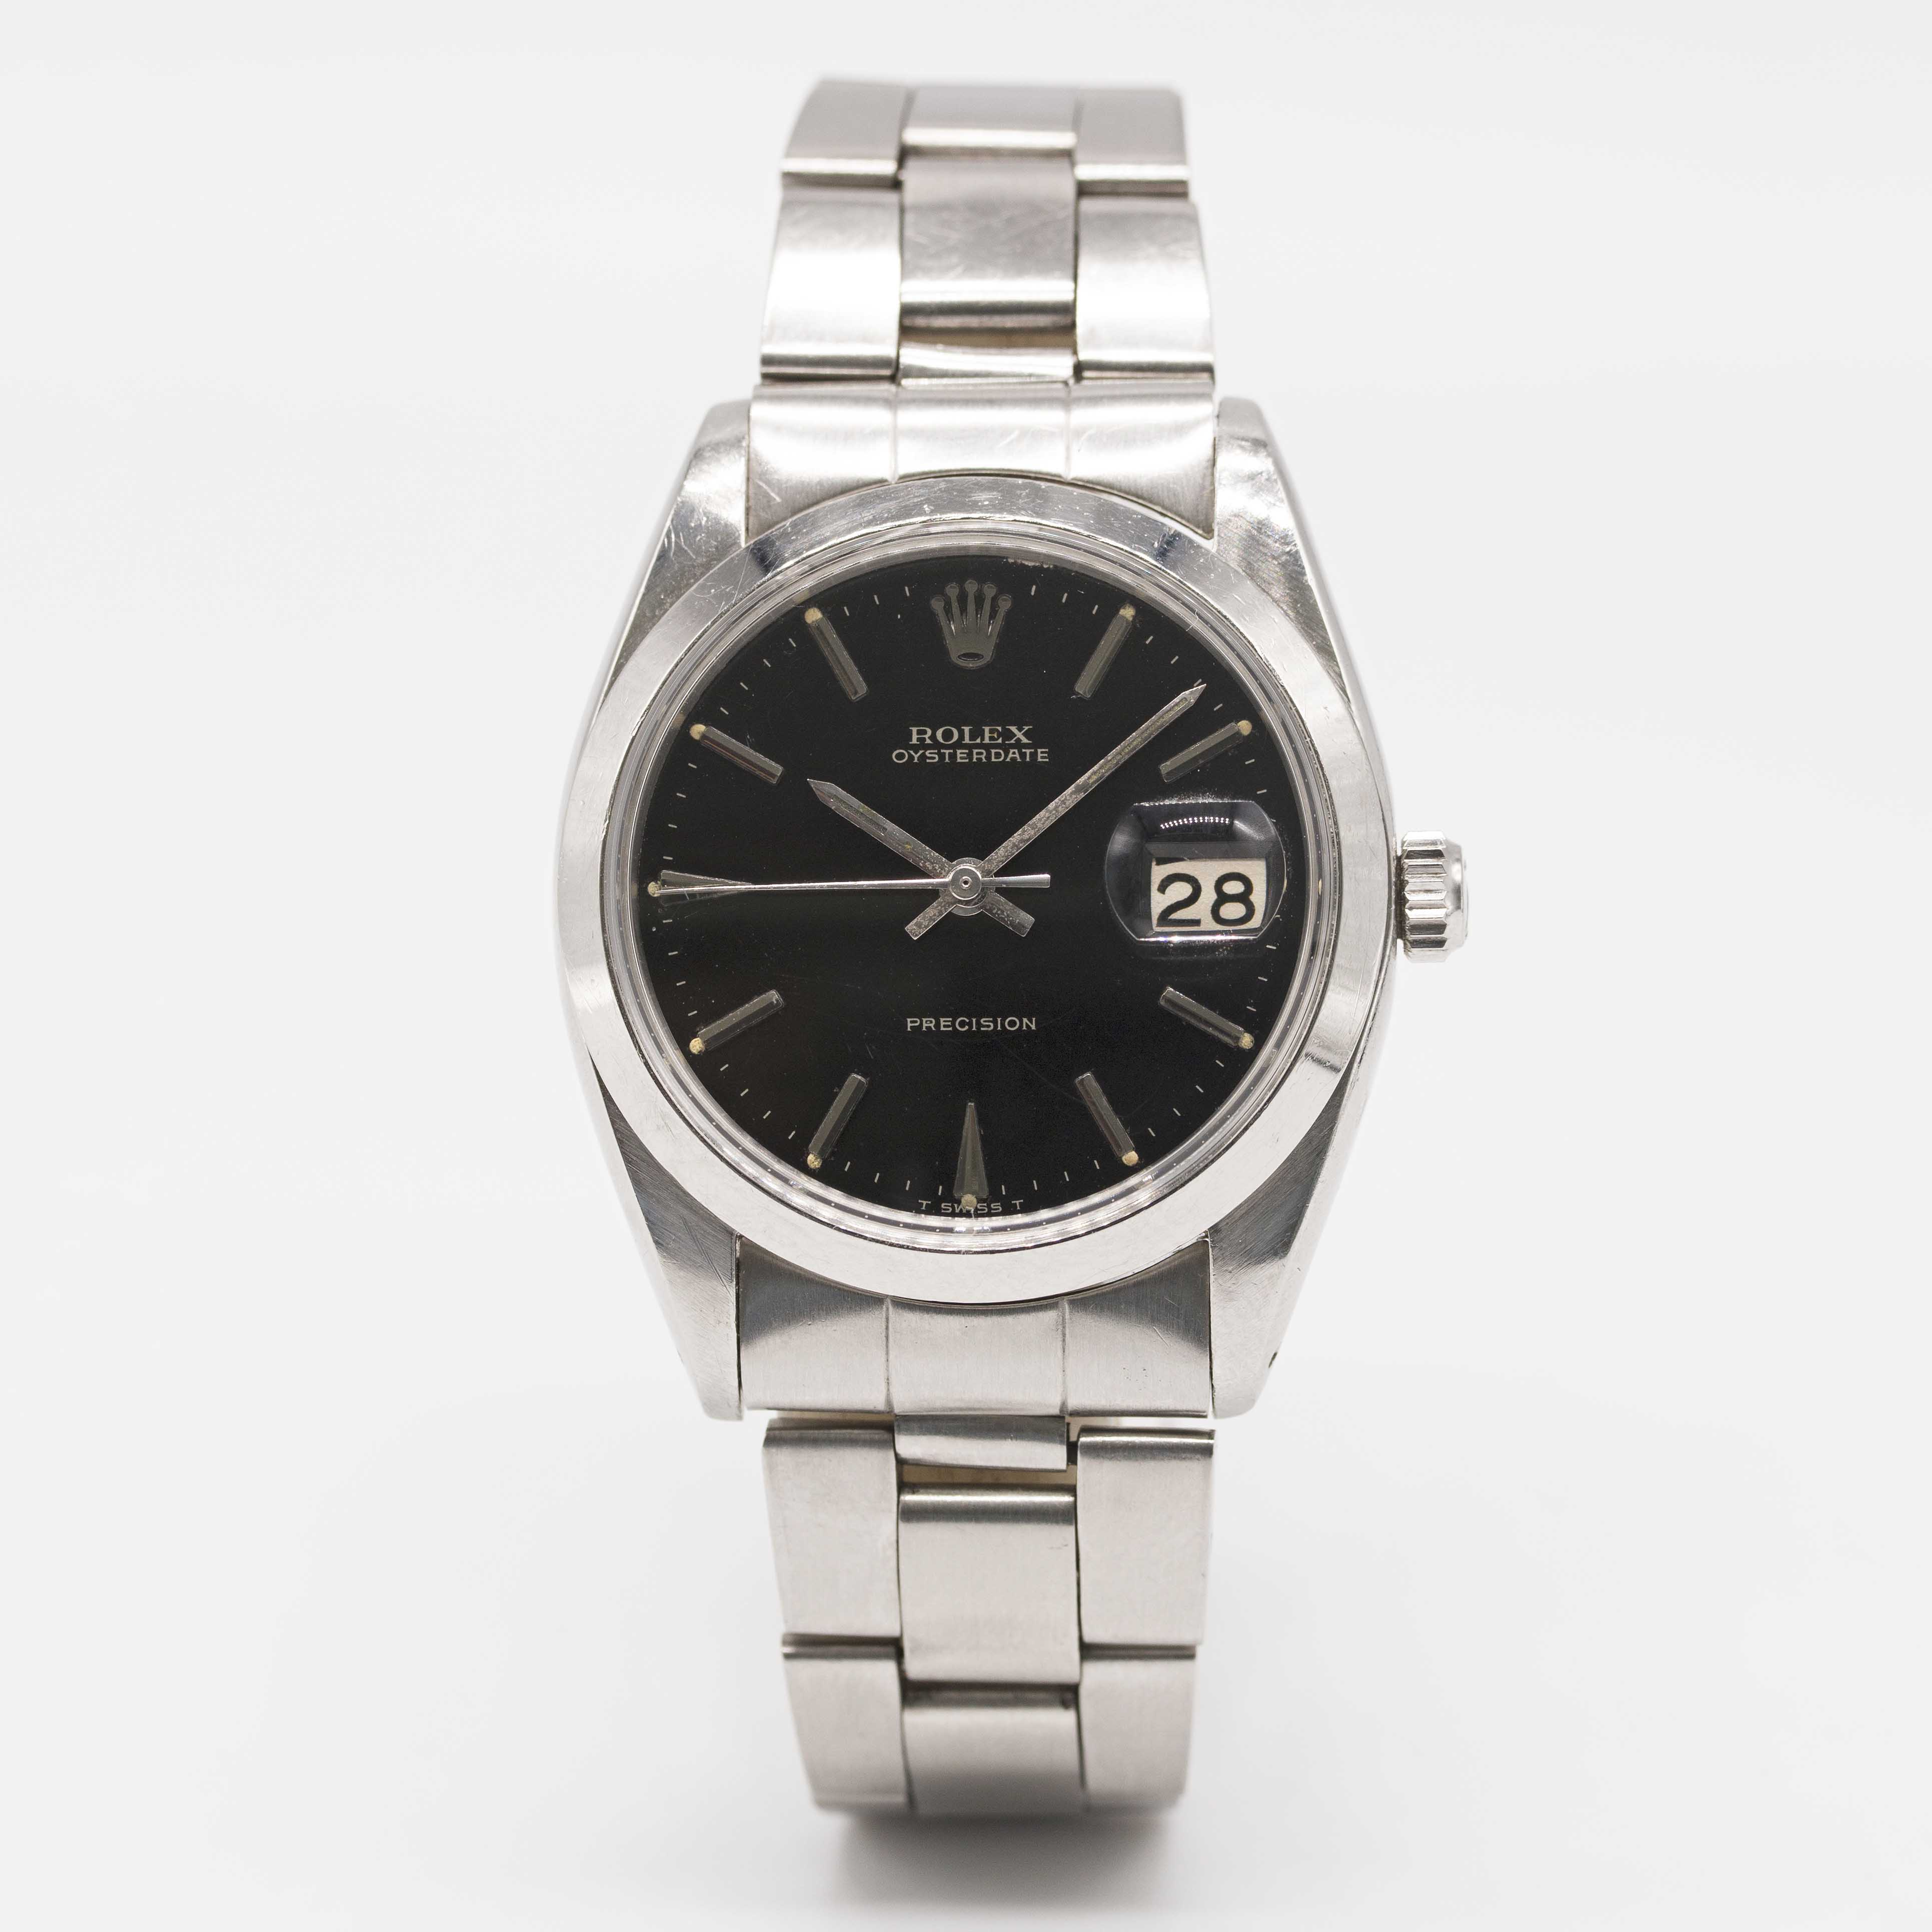 A GENTLEMAN'S STAINLESS STEEL ROLEX OYSTERDATE PRECISION BRACELET WATCH CIRCA 1966, REF. 6694 WITH - Image 2 of 10